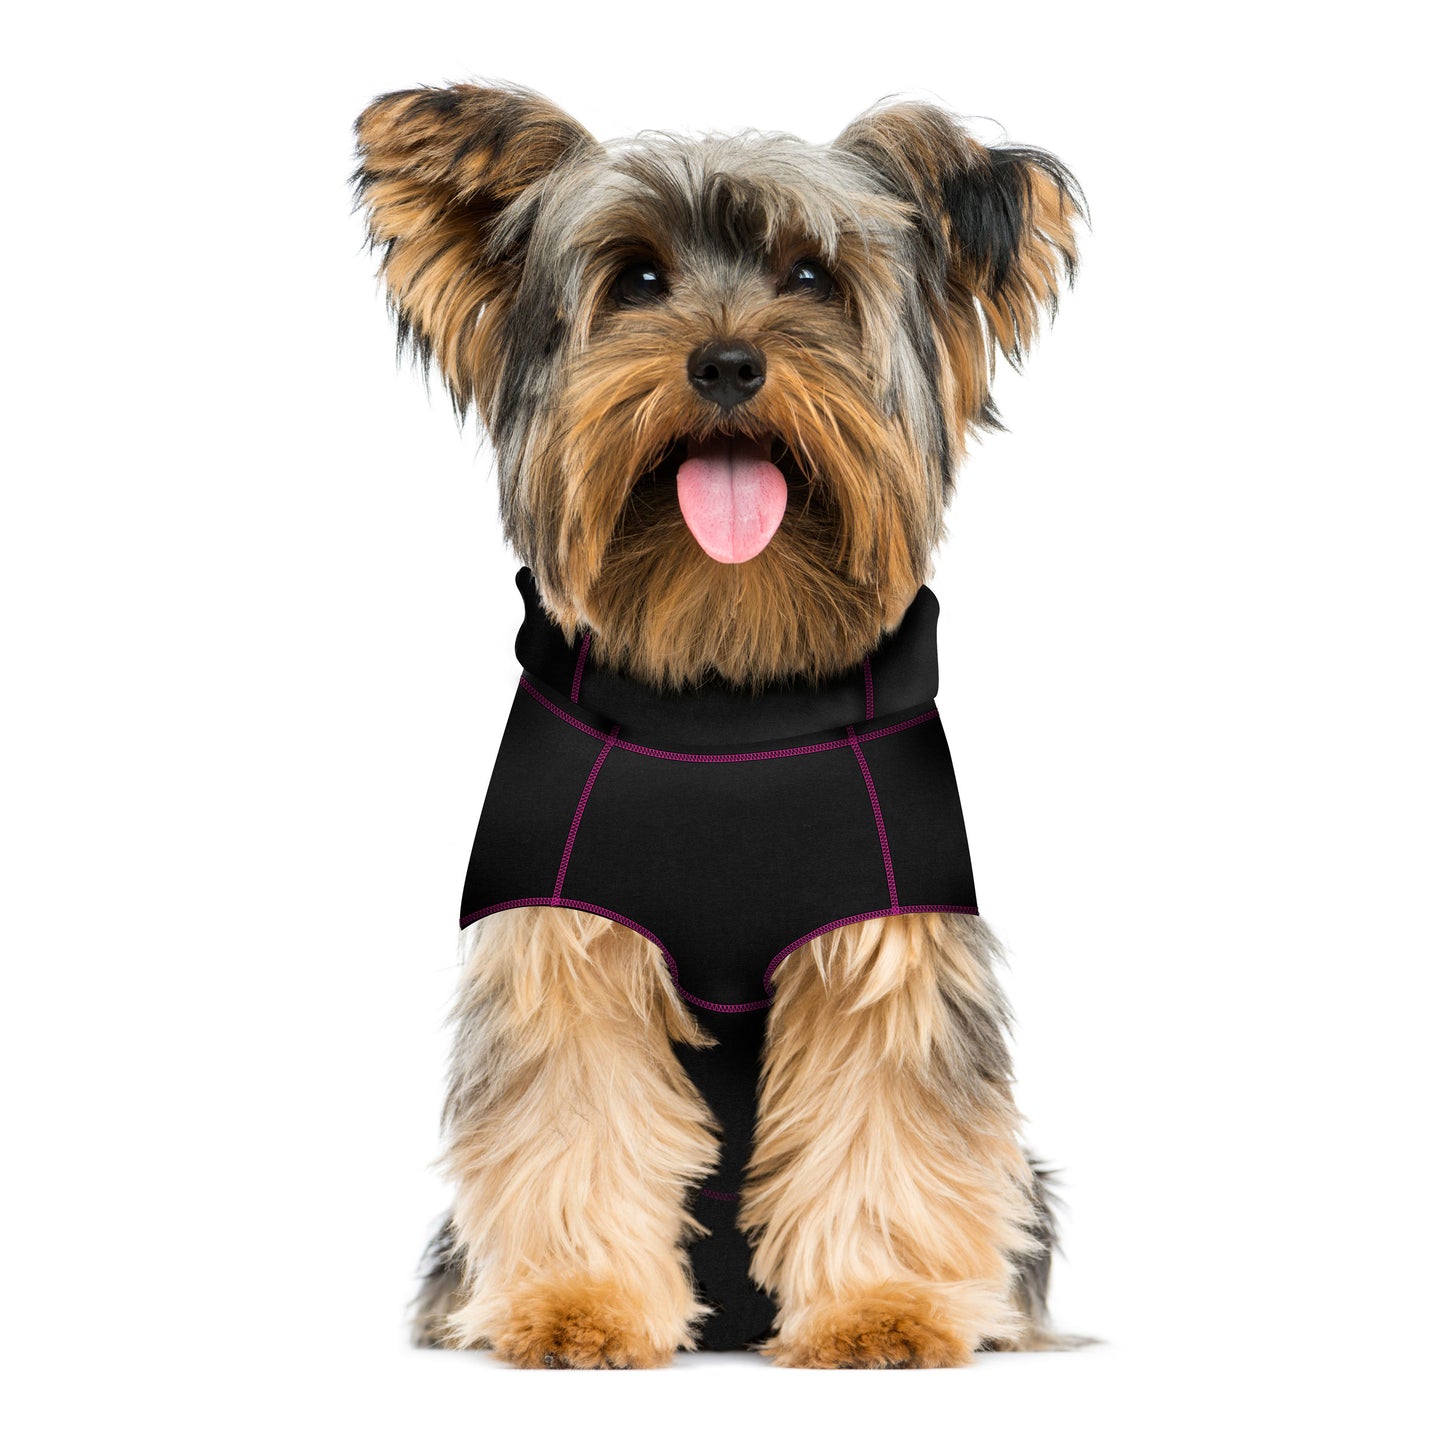 A Yorkshire terrier wearing a Your Whole Dog MediPaw Protective/Surgical Dog Suit.